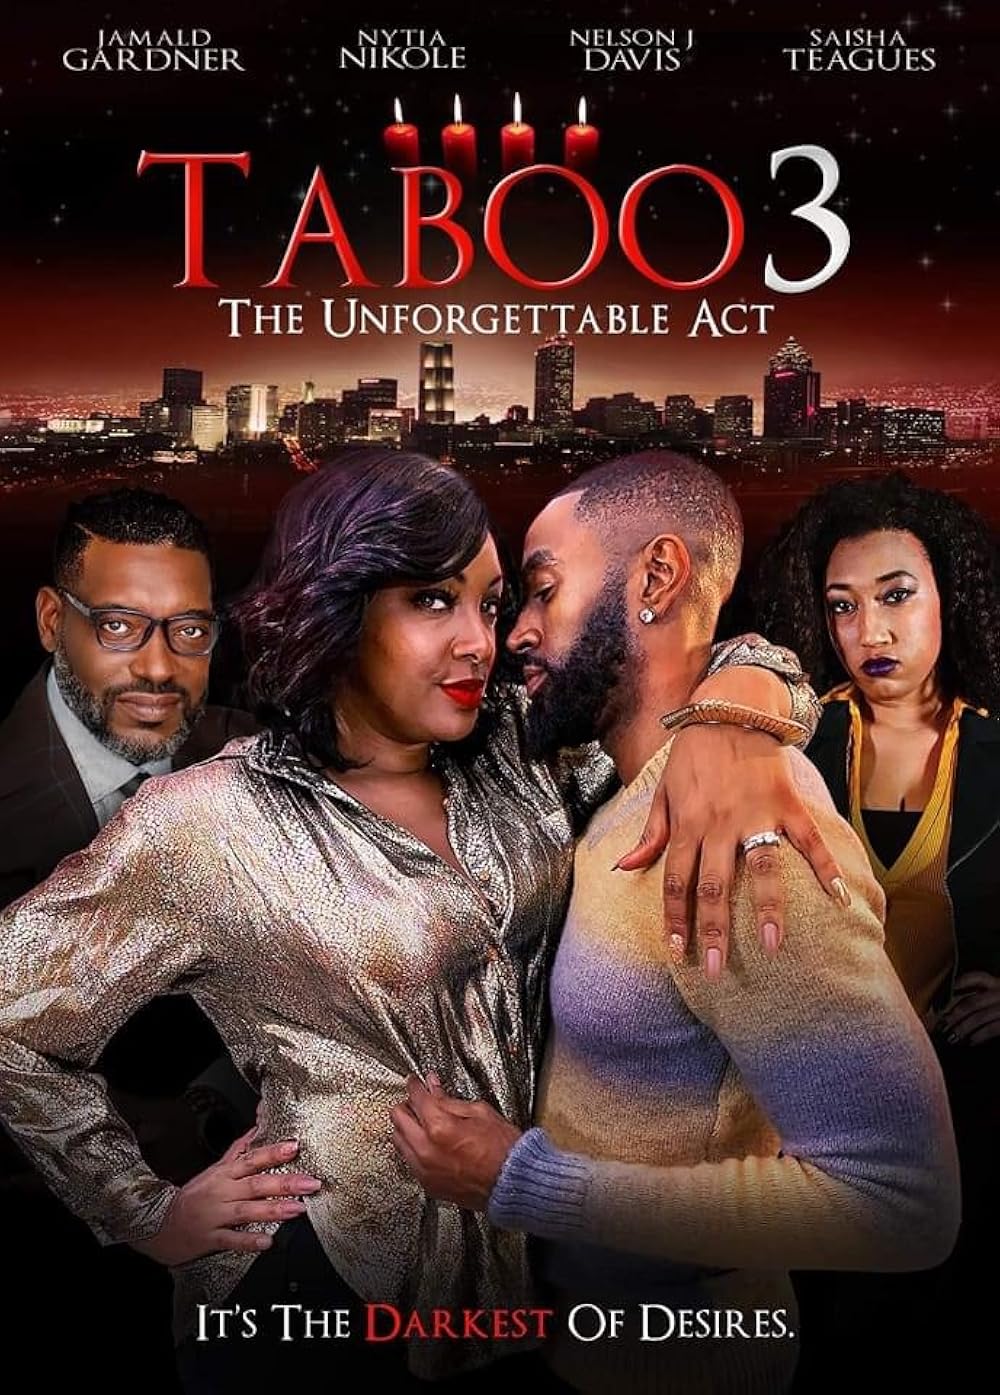 ashley bel recommends taboo 3 the movie pic